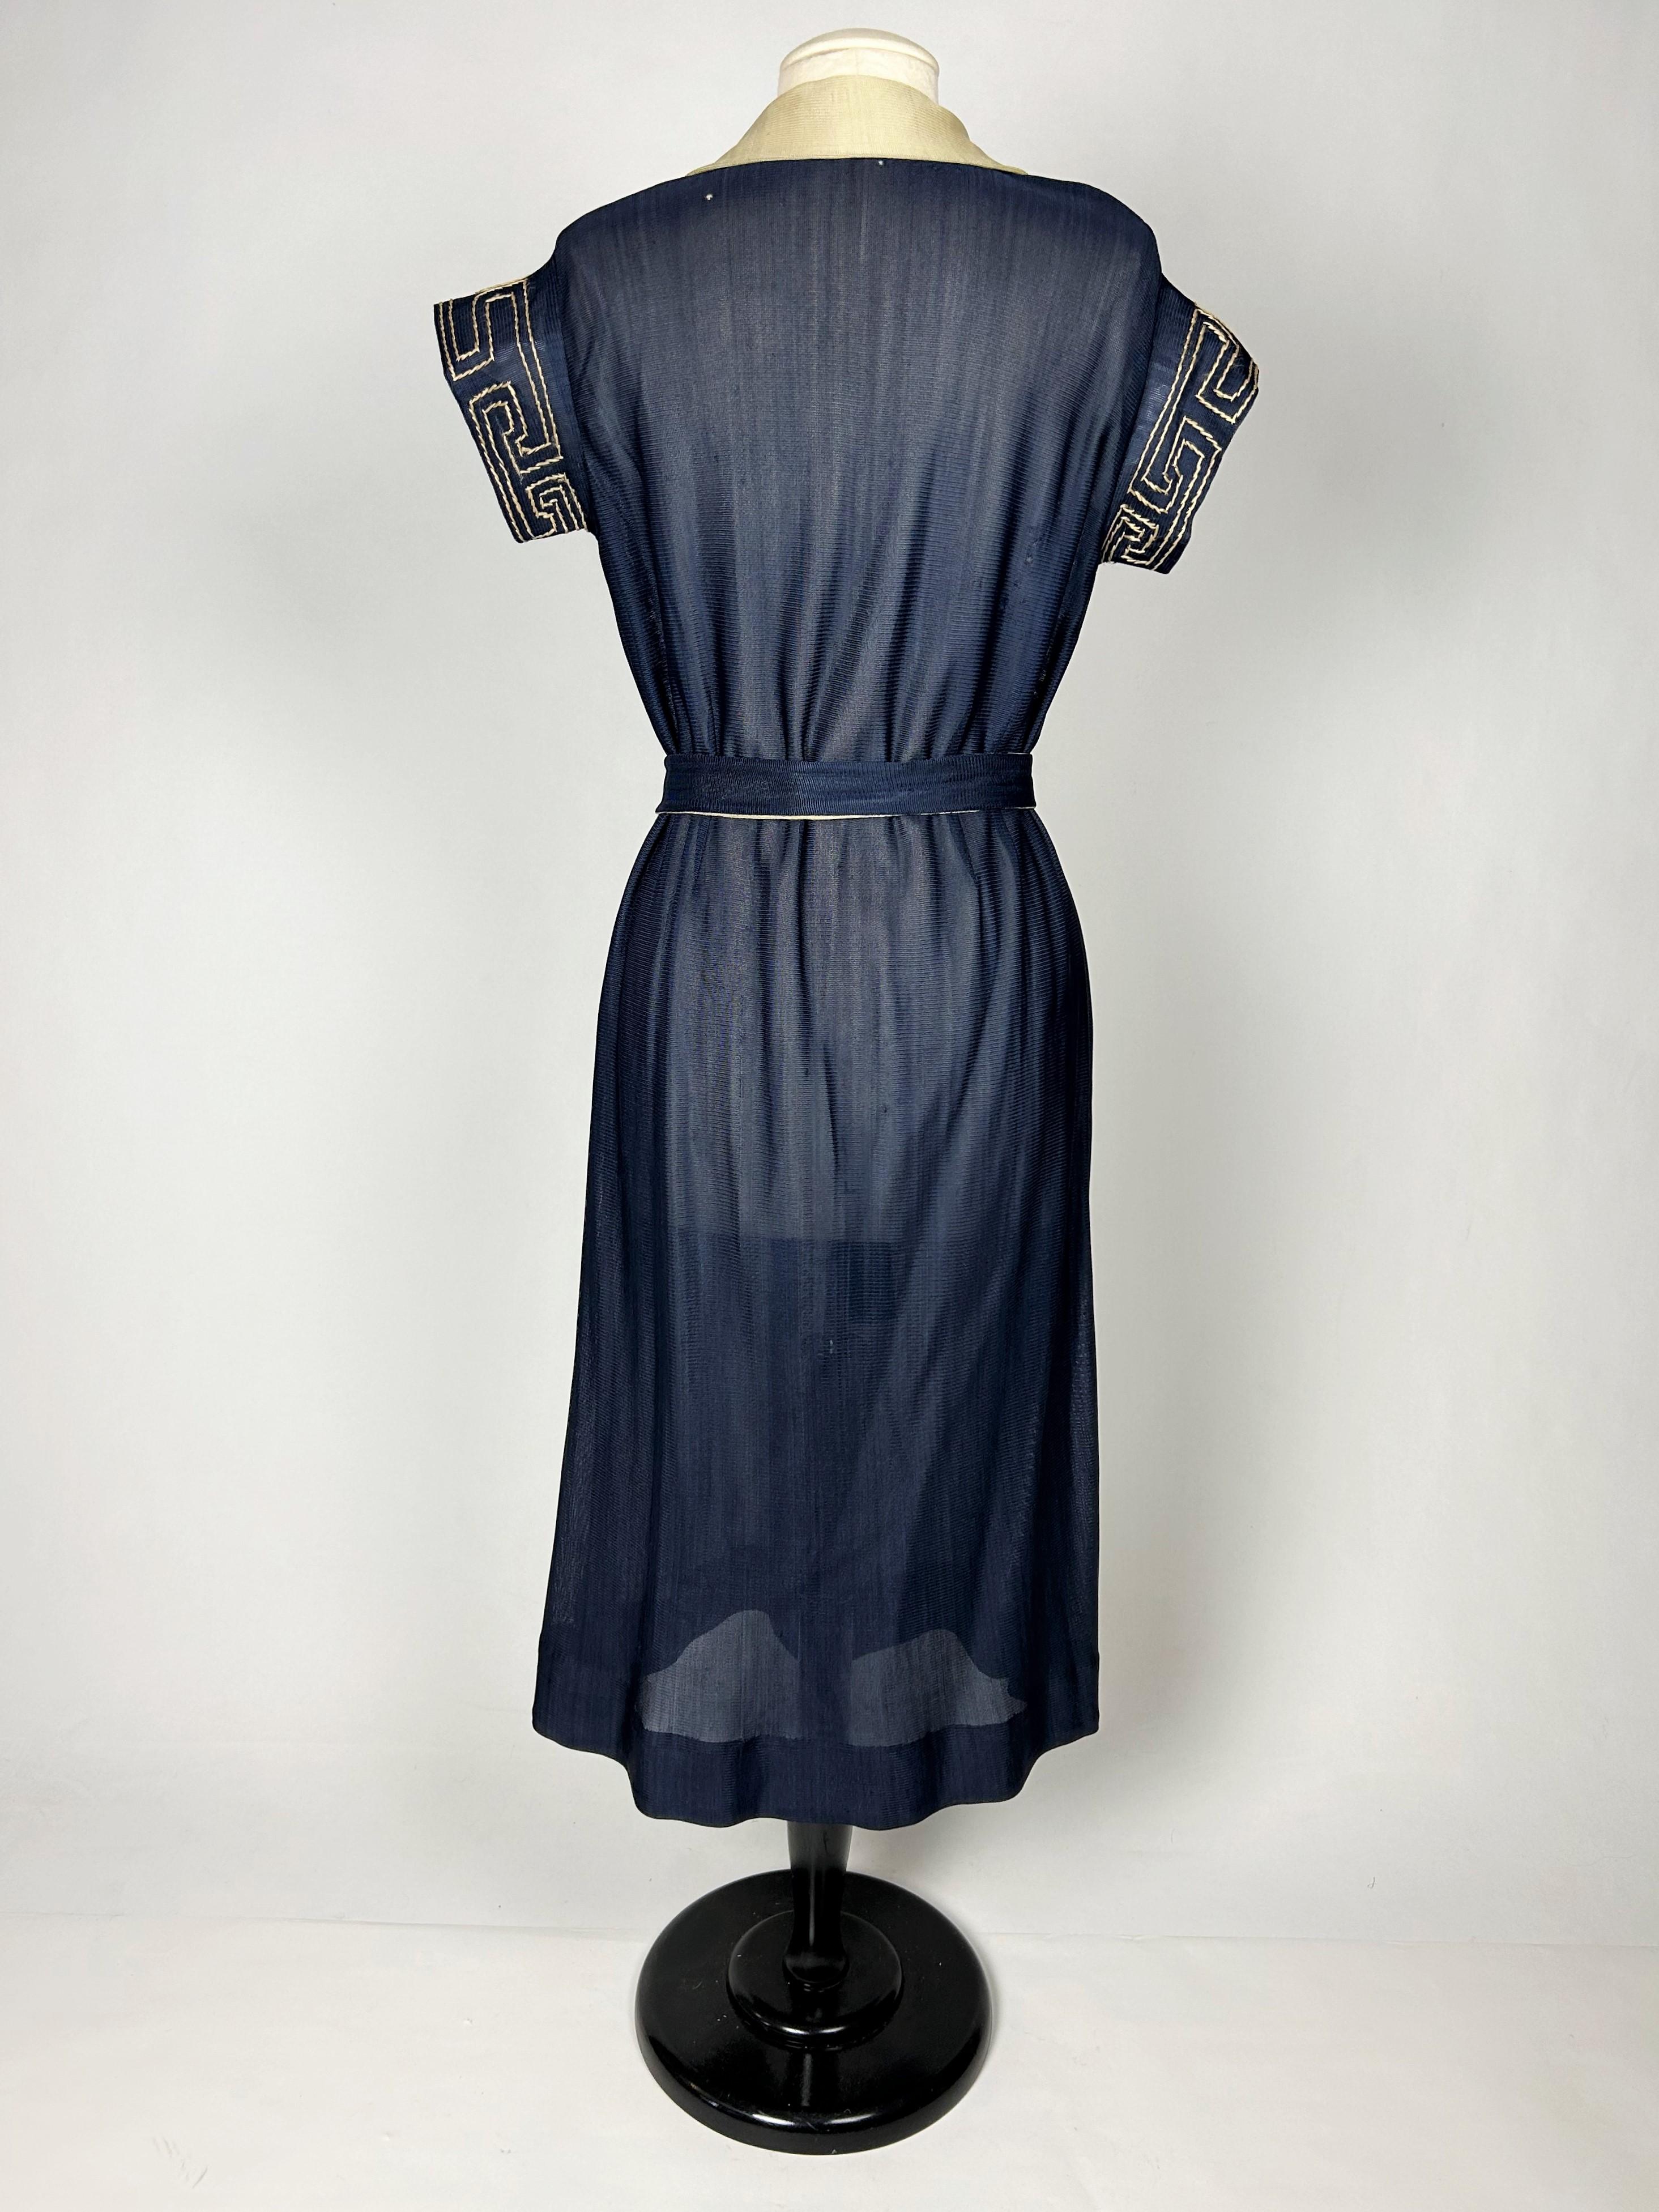 CC embroidered jersey knit silk Dress in the style of Coco Chanel France C. 1920 For Sale 9